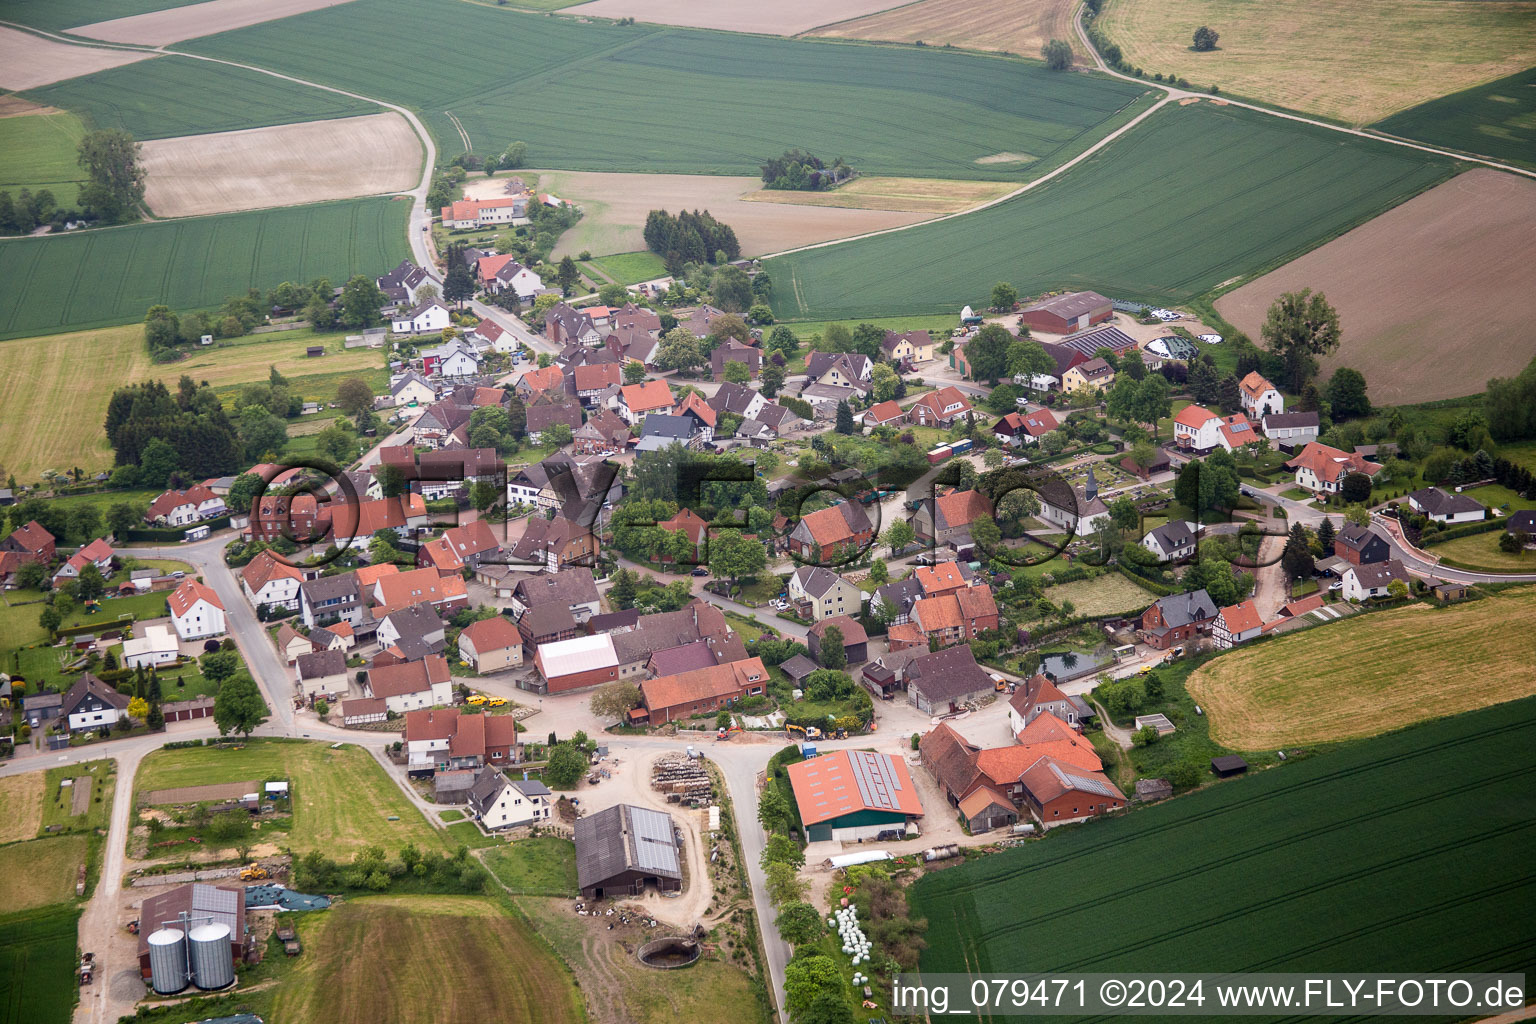 Village - view on the edge of agricultural fields and farmland in the district Luentorf in Emmerthal in the state Lower Saxony, Germany